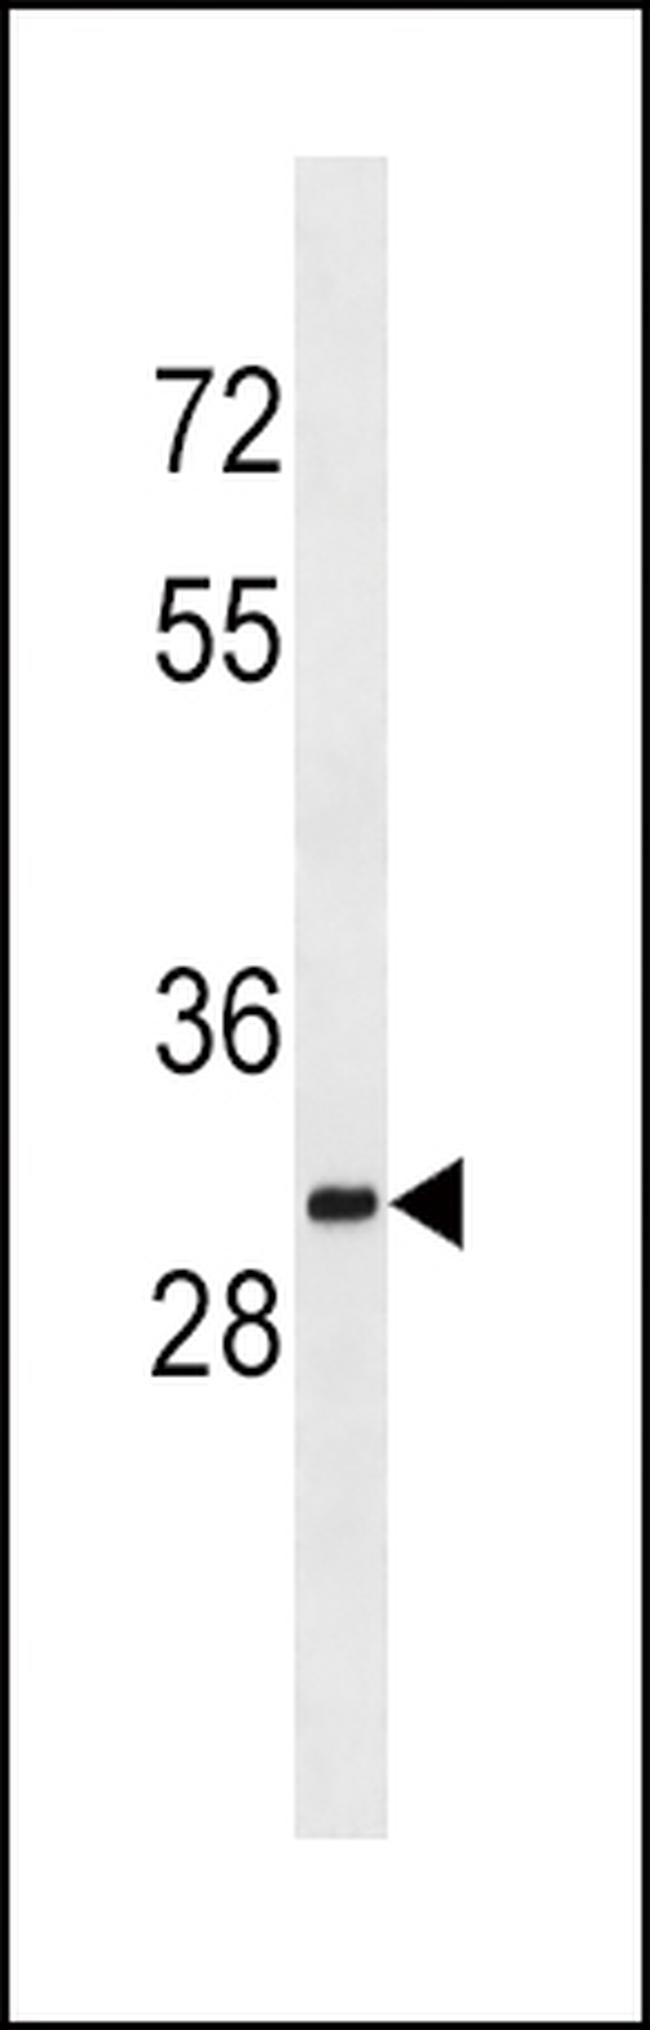 SULT1A2 Antibody in Western Blot (WB)